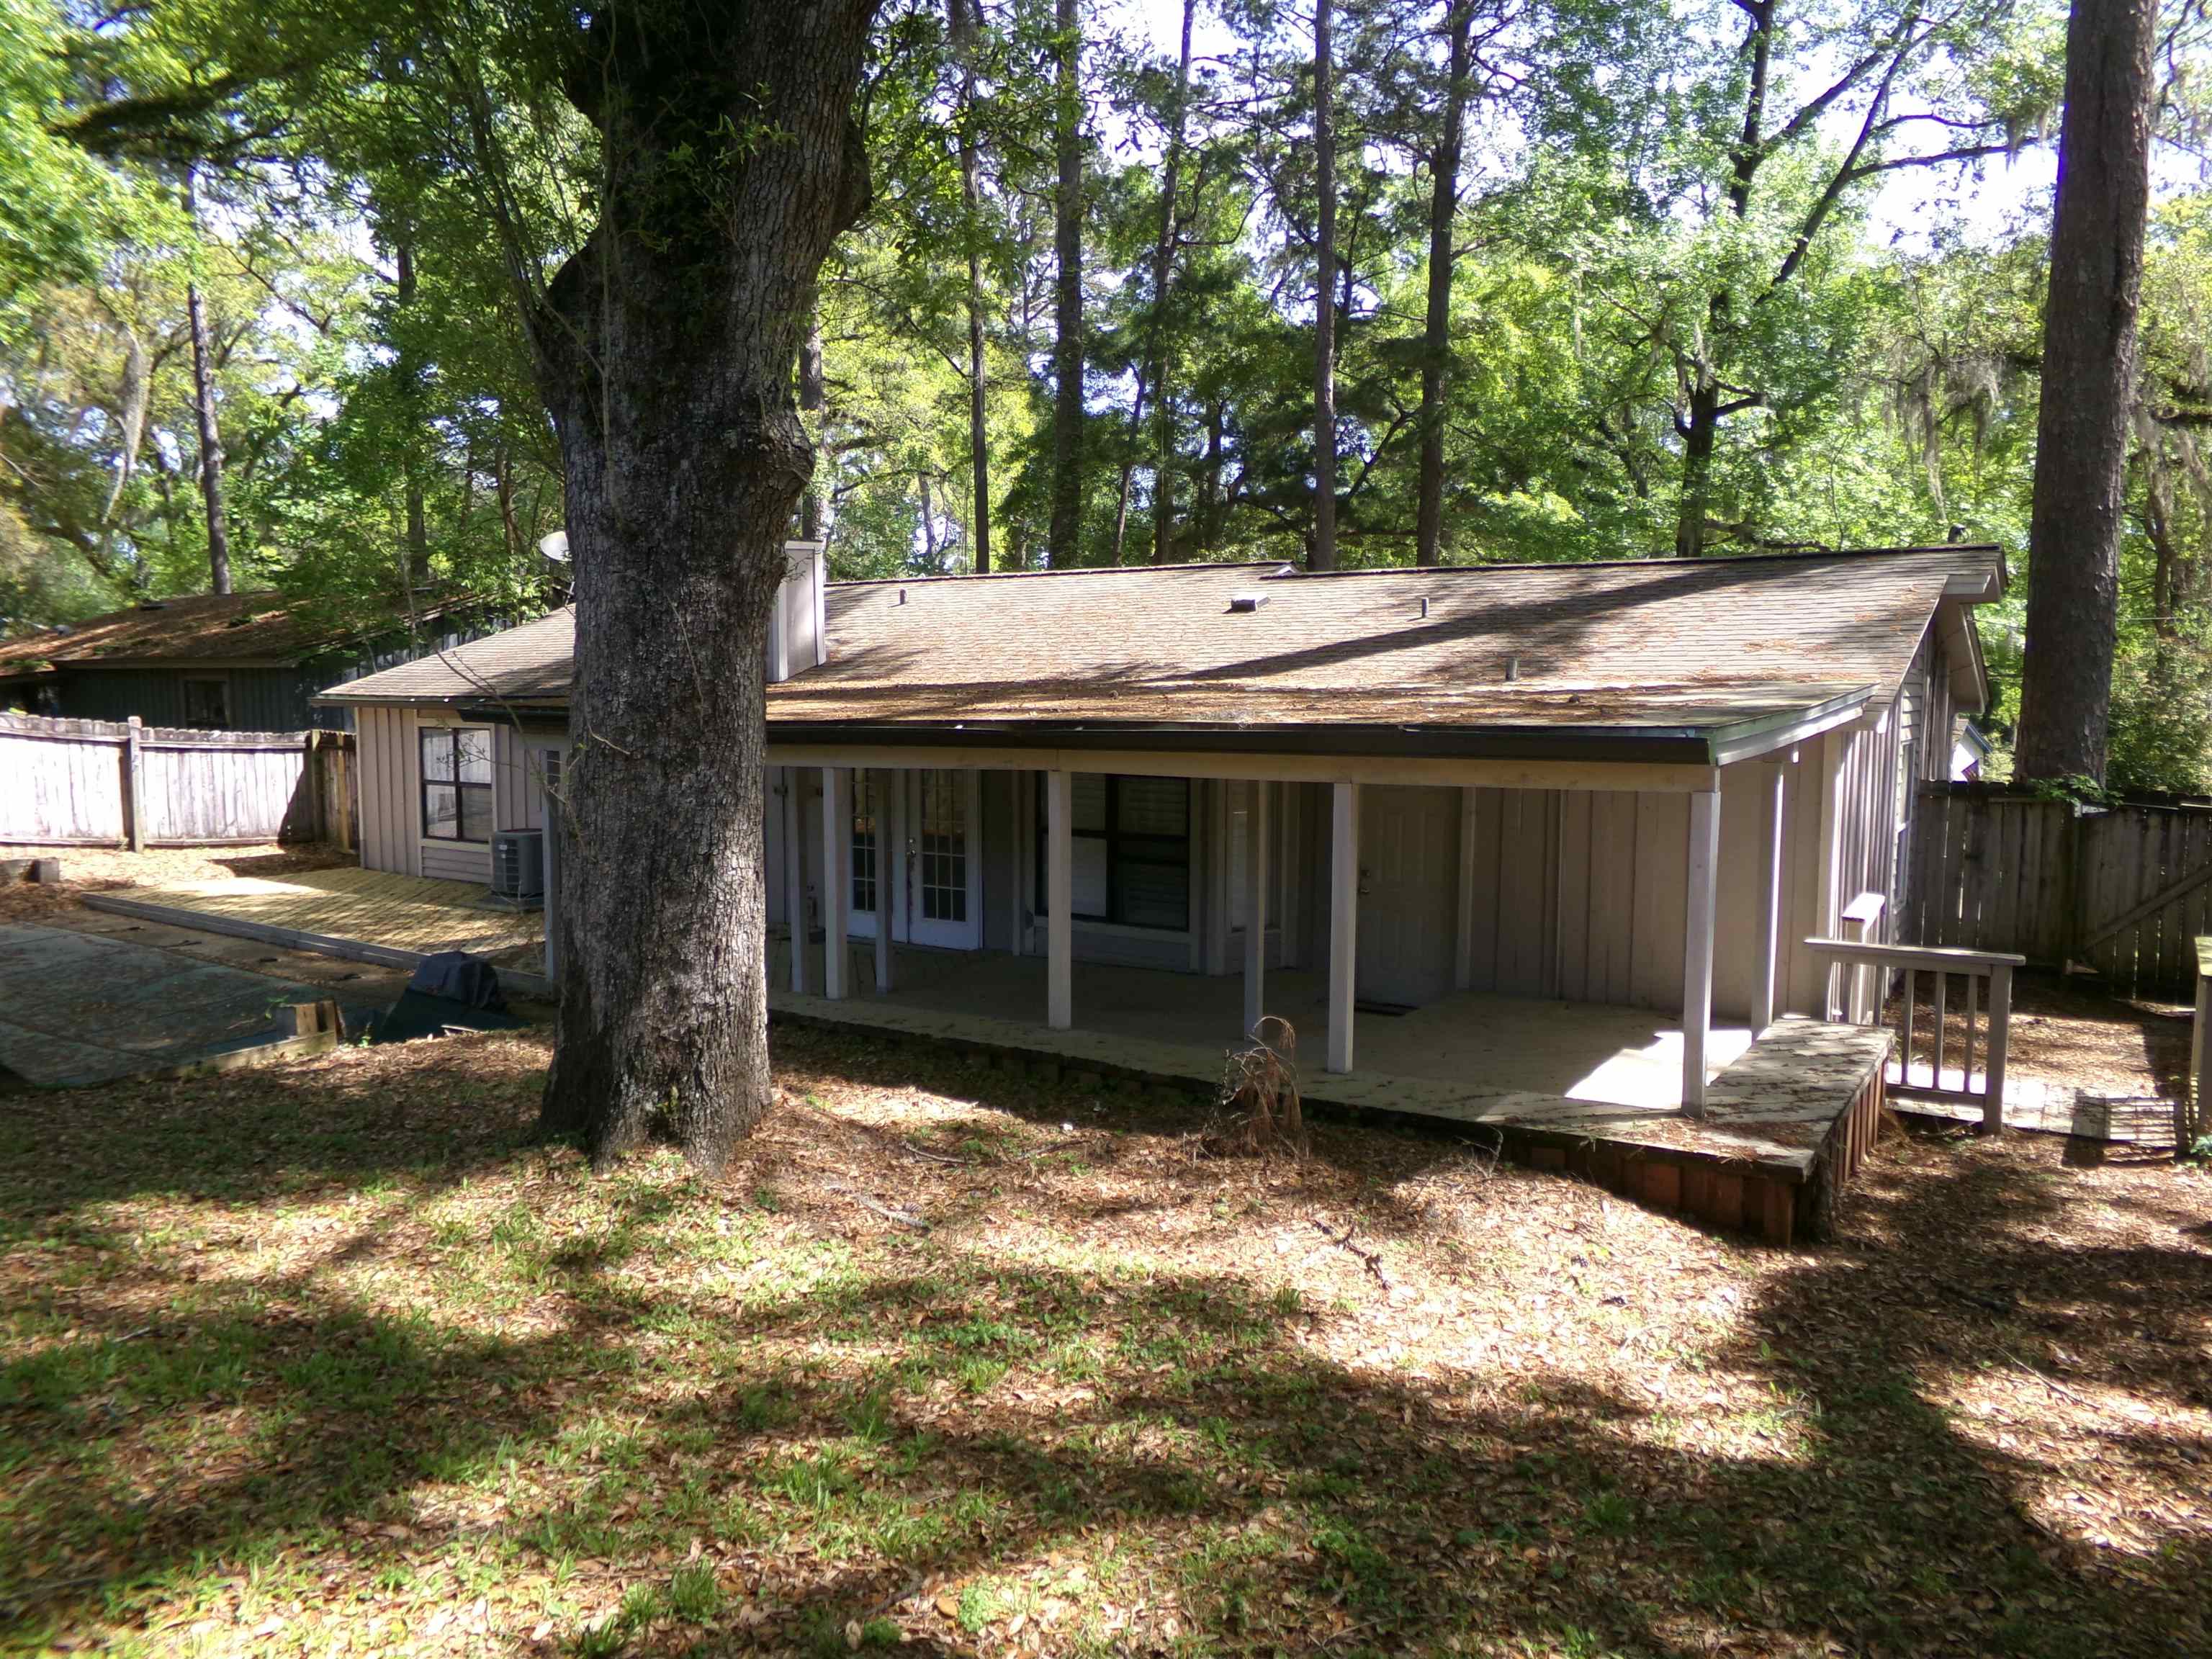 2416 Lanrell Drive,TALLAHASSEE,Florida 32303,4 Bedrooms Bedrooms,2 BathroomsBathrooms,Detached single family,2416 Lanrell Drive,370217